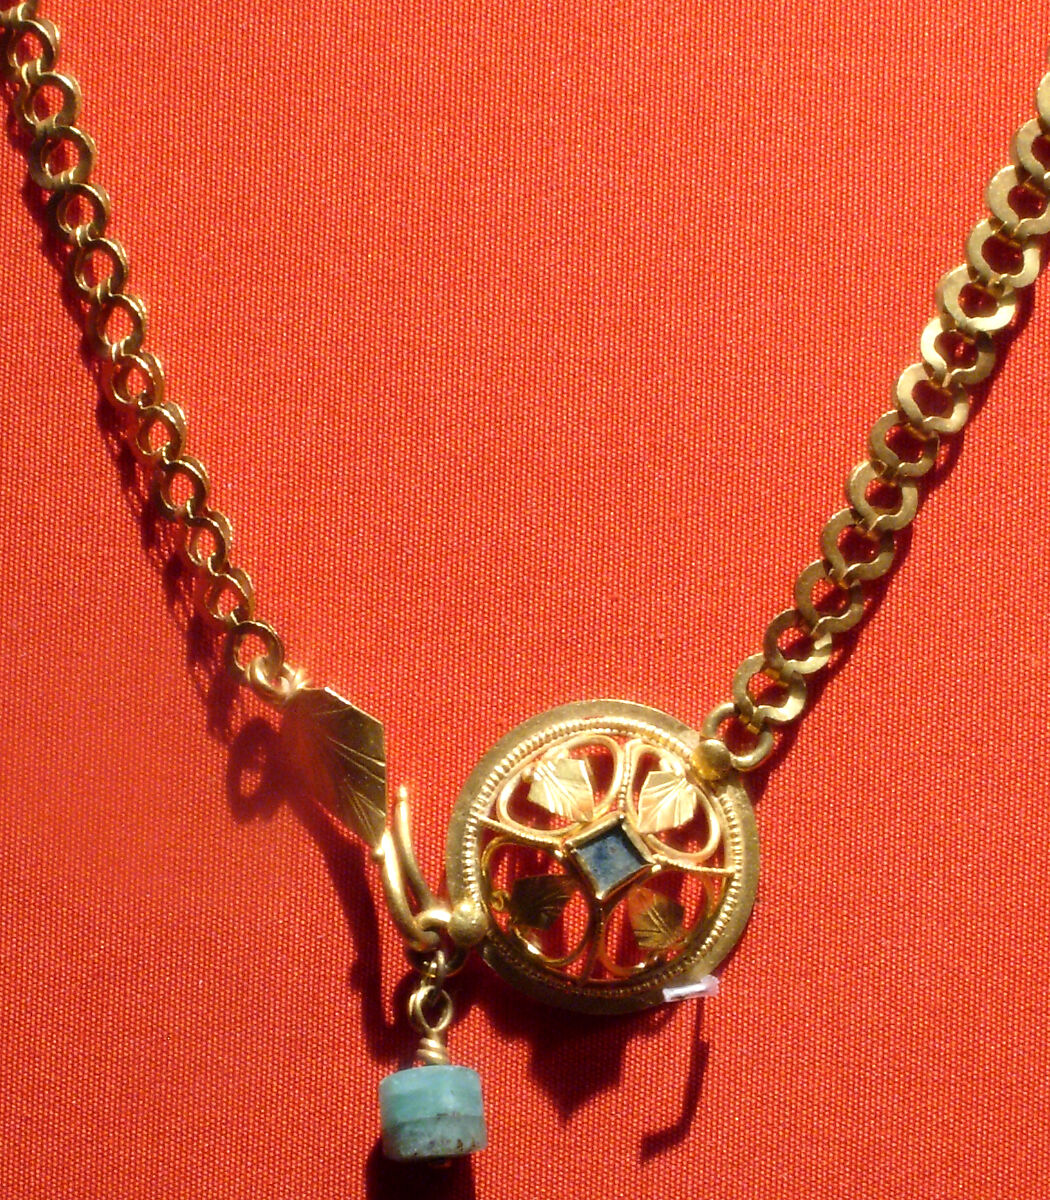 Chain terminating in a leaf motif, and having a raised openwork clasp ornament, gold, blue stone, emerald 